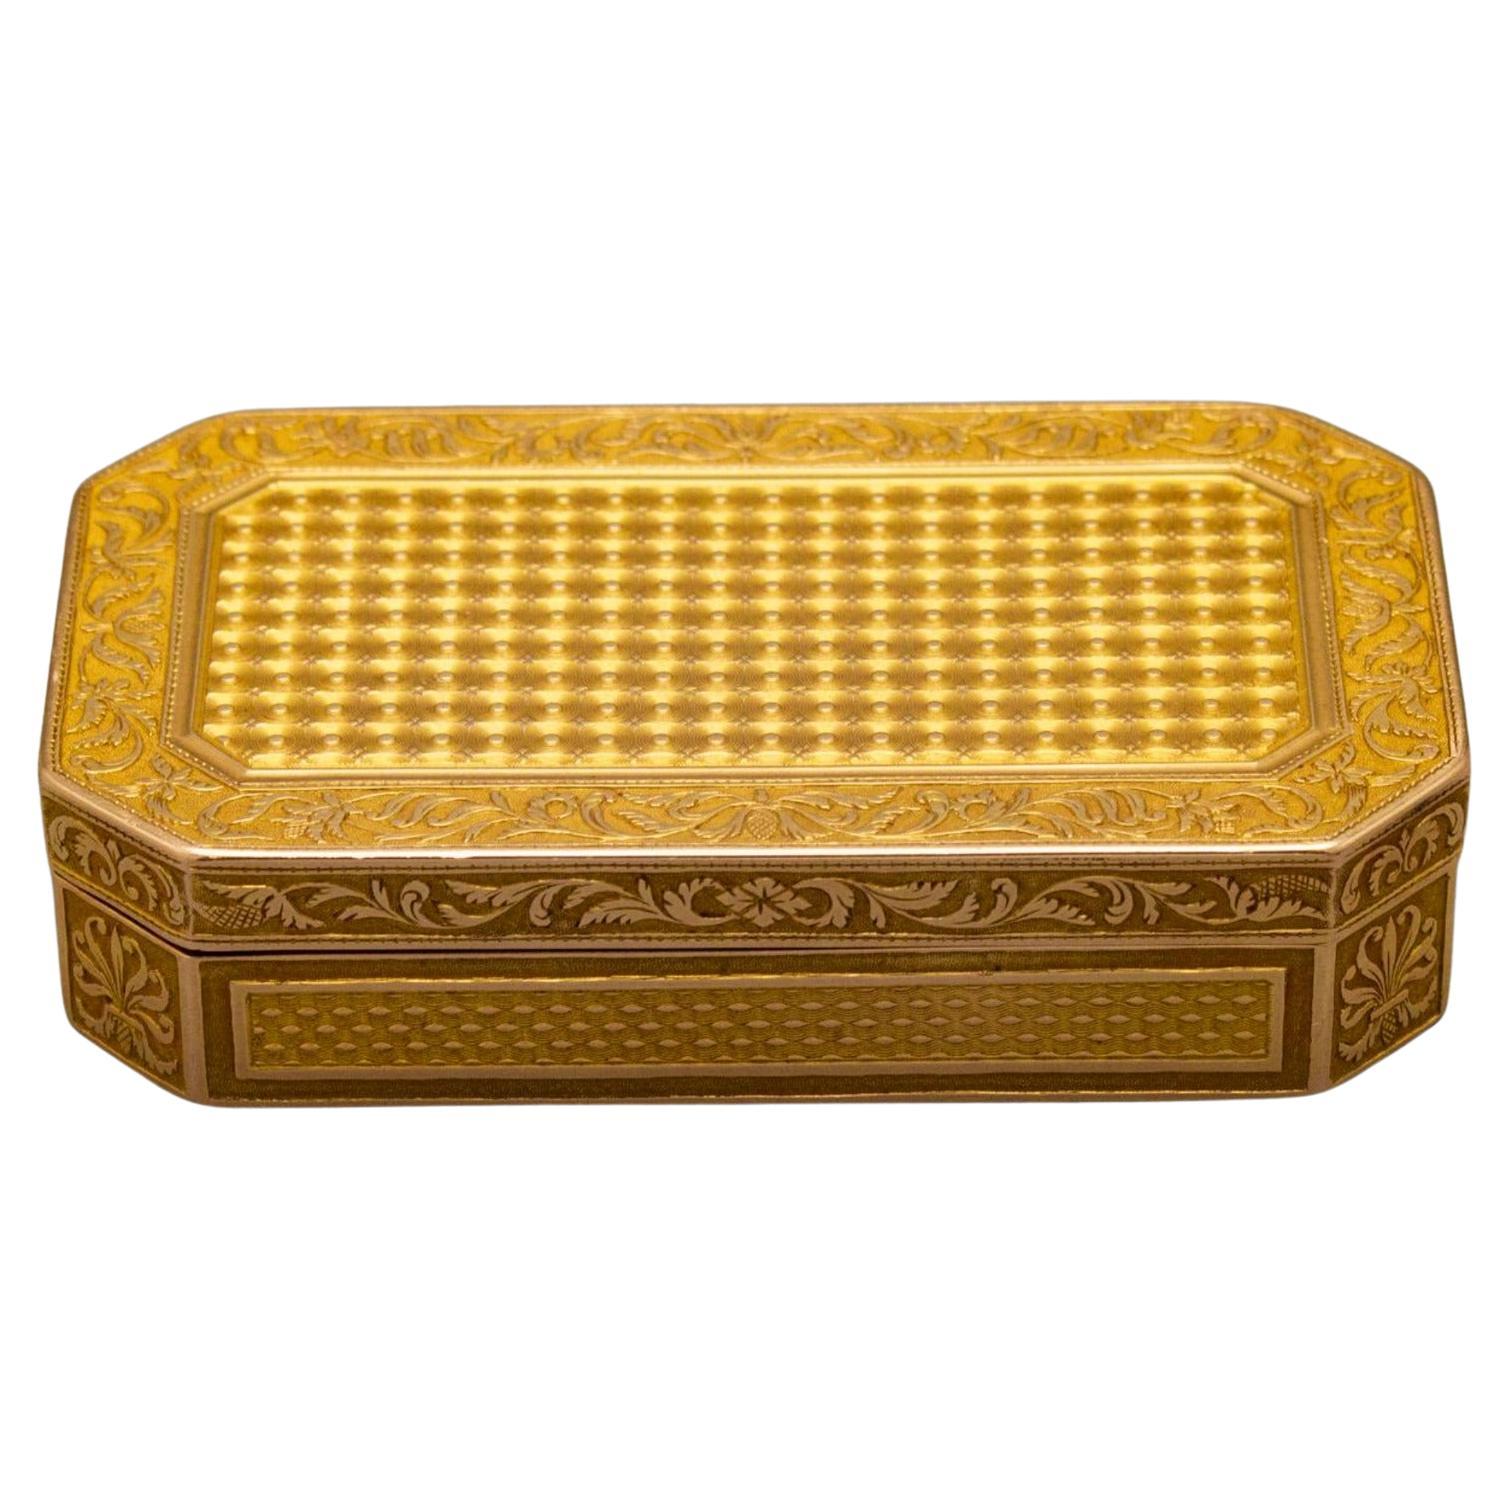 Amazing French Gold "Tabatiere" 18 Ct Gold Snuff Box, Paris 1800, Early 19th C